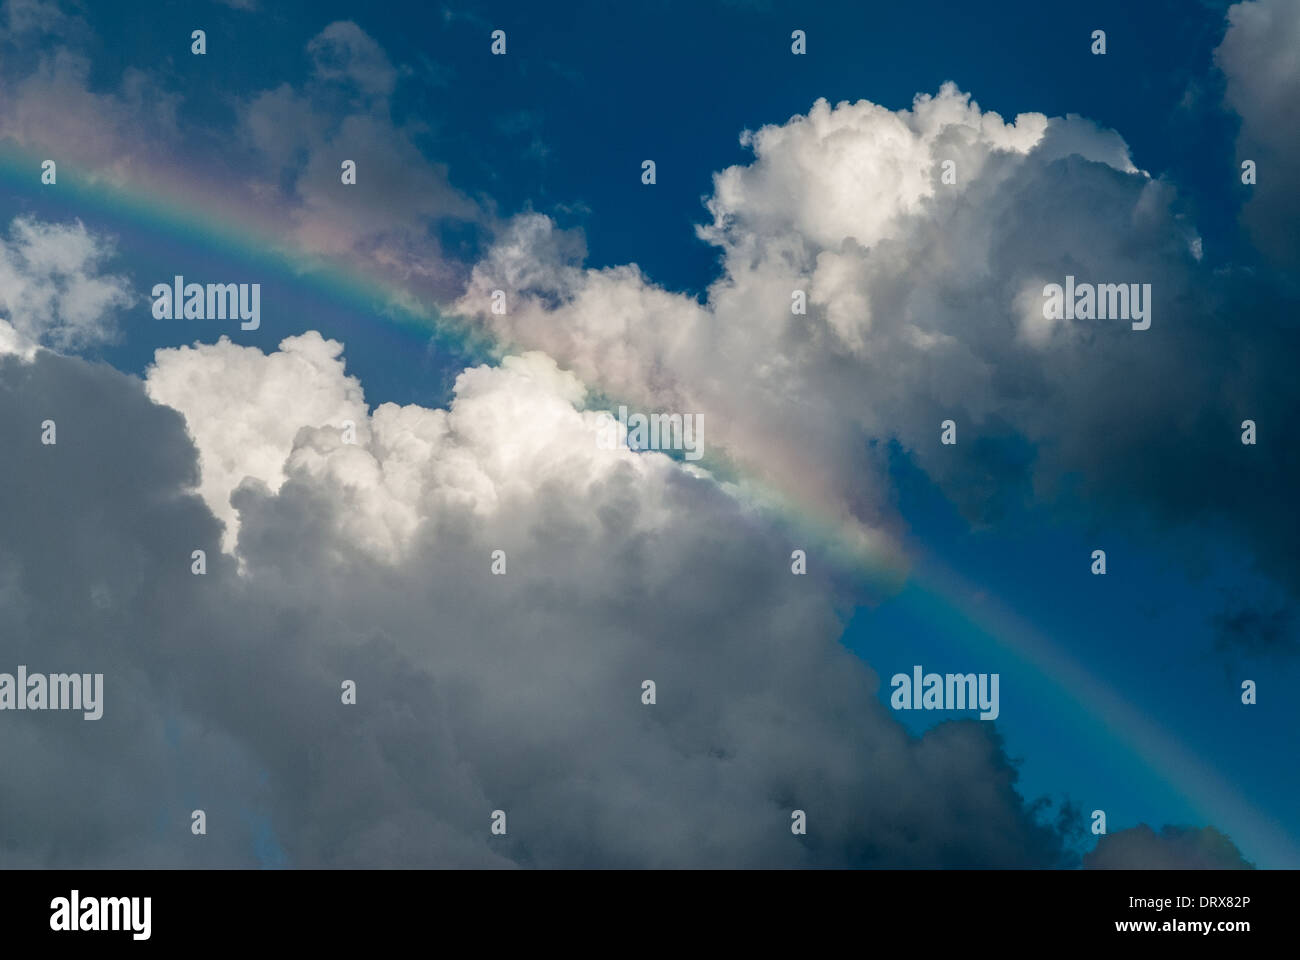 Rainbow on blue sky with white clouds Stock Photo